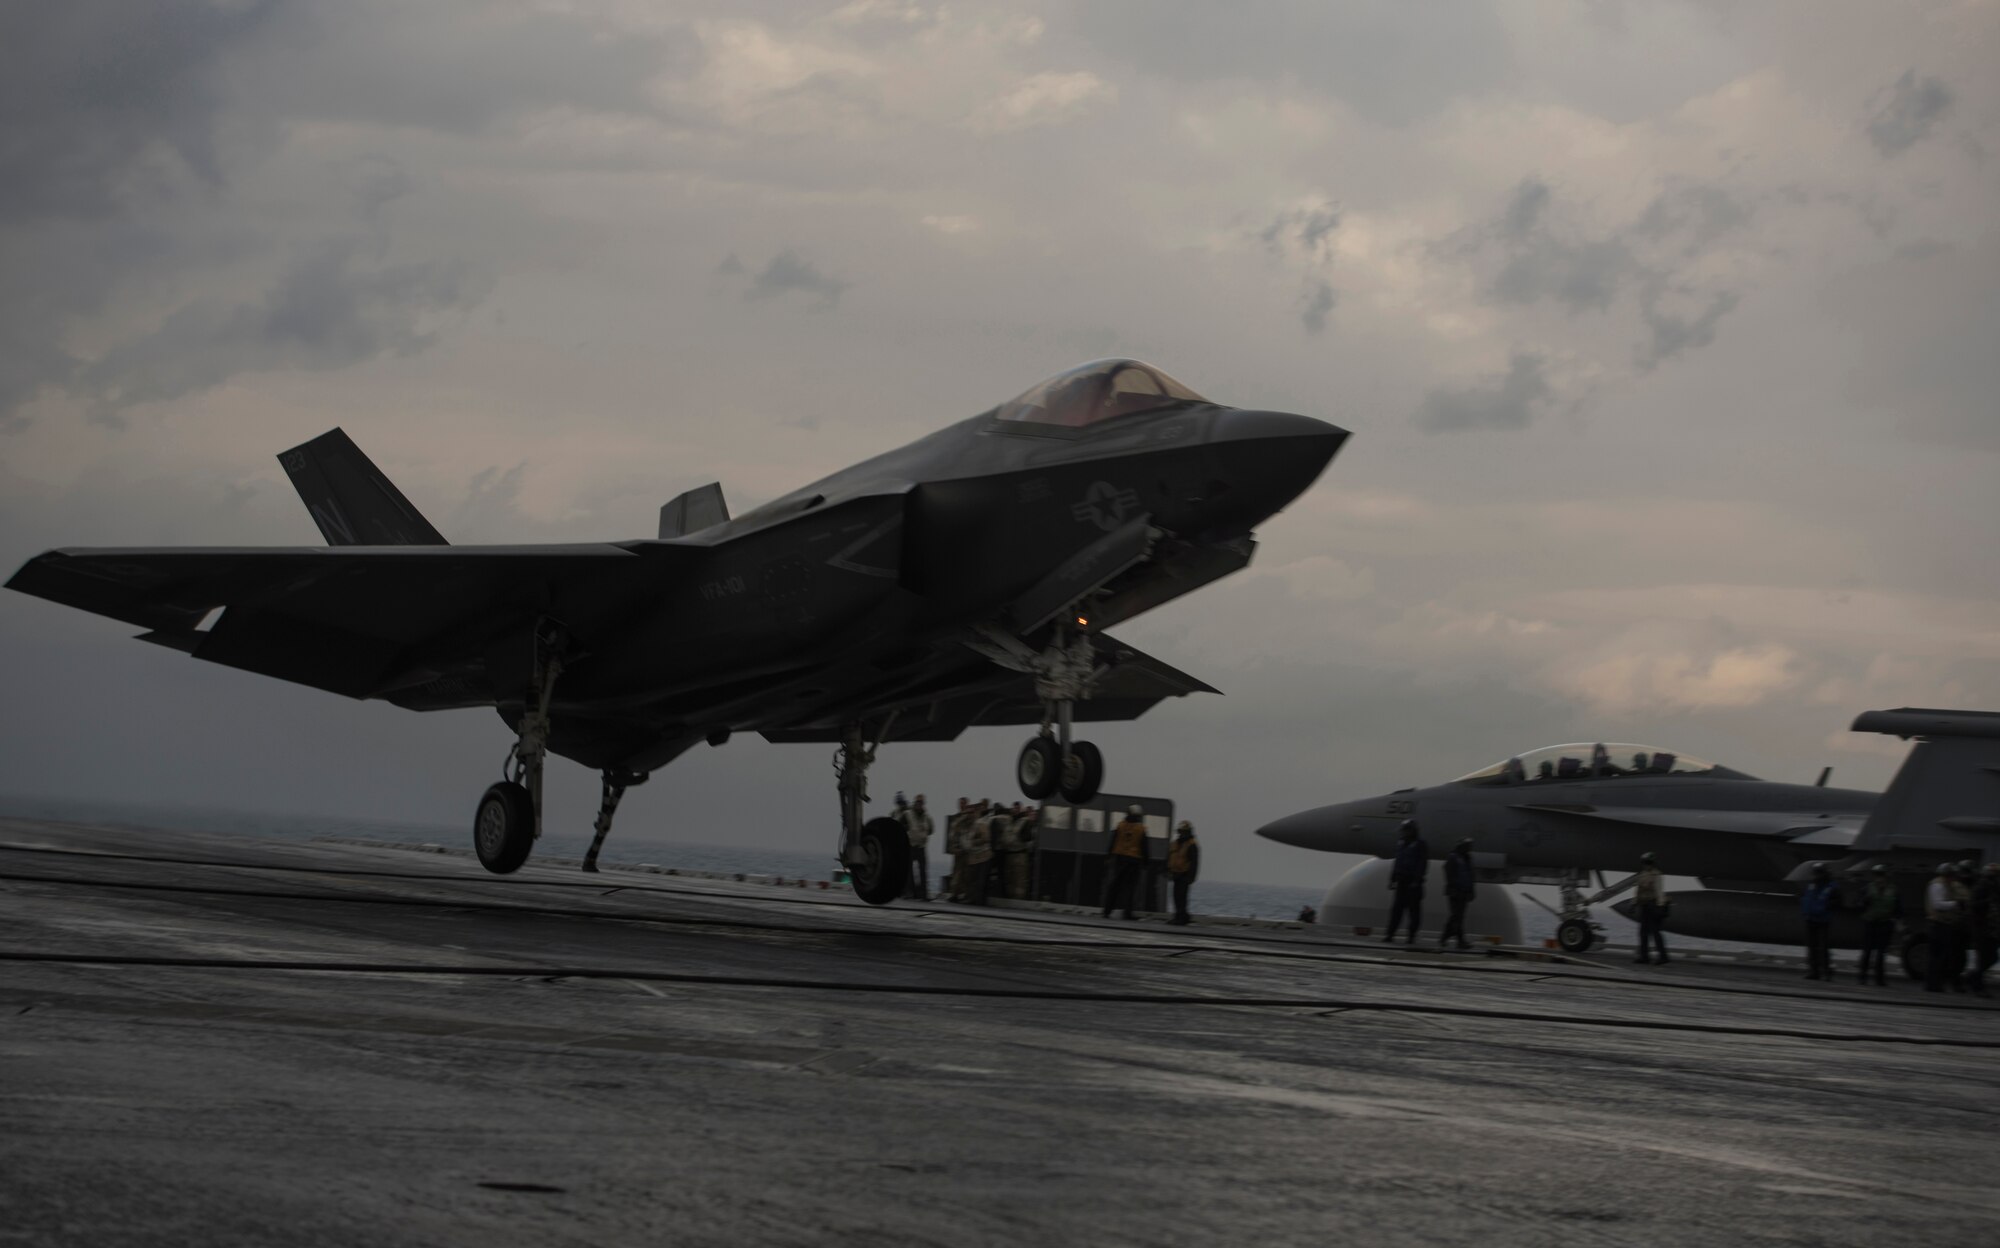 An F-35C Lightning II assigned to Strike Fighter Squadron (VFA) 101, lands on the Nimitz-Class aircraft carrier USS Abraham Lincoln (CVN-72) March 17, 2018, in the Altantic Ocean. (U.S. Air Force photo by Staff Sgt. Peter Thompson/Released)